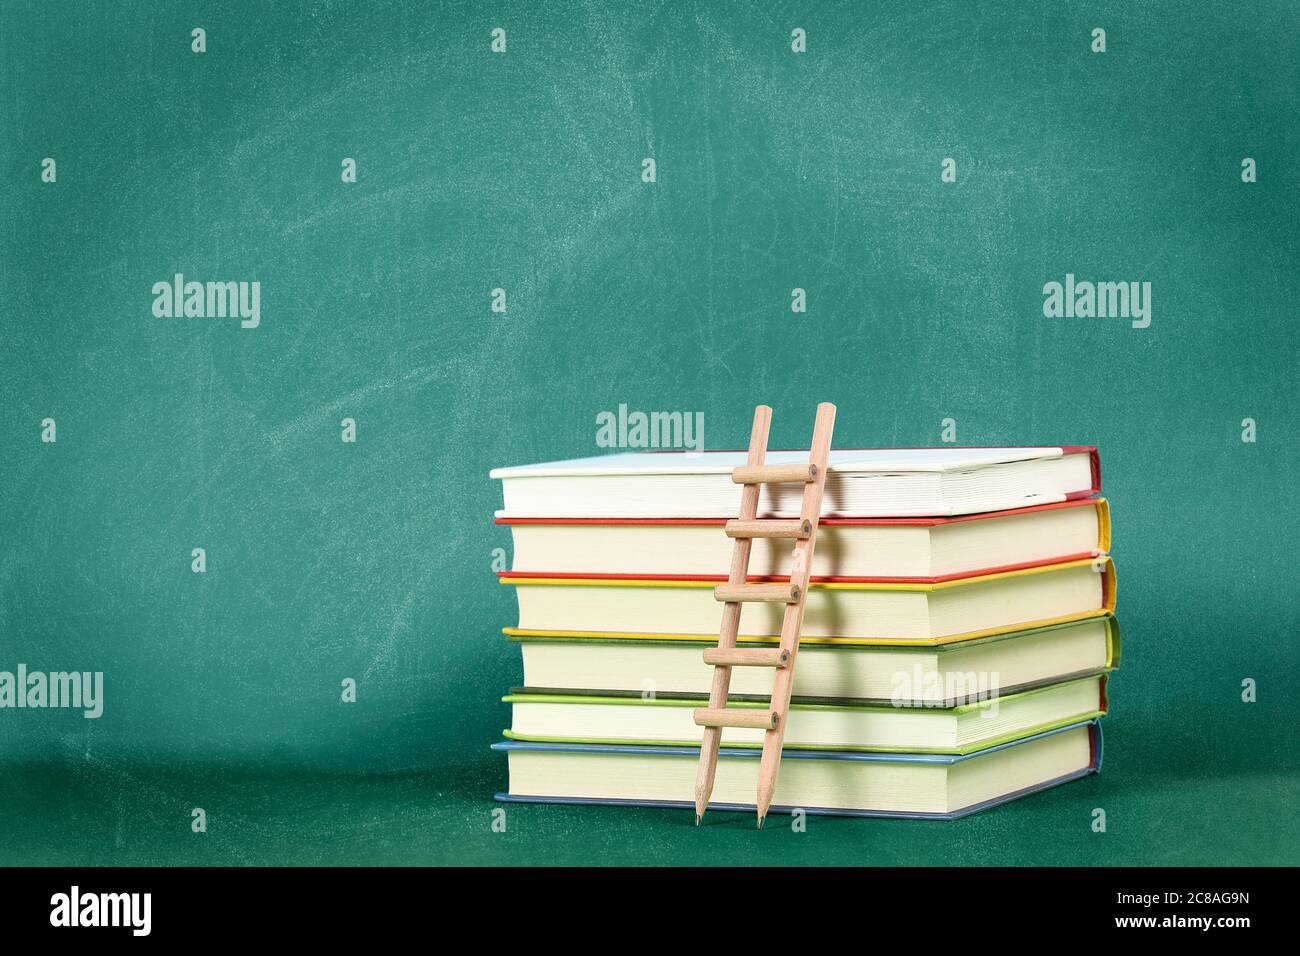 pencil ladder on stack of books against green chalkboard, education concept or background Stock Photo